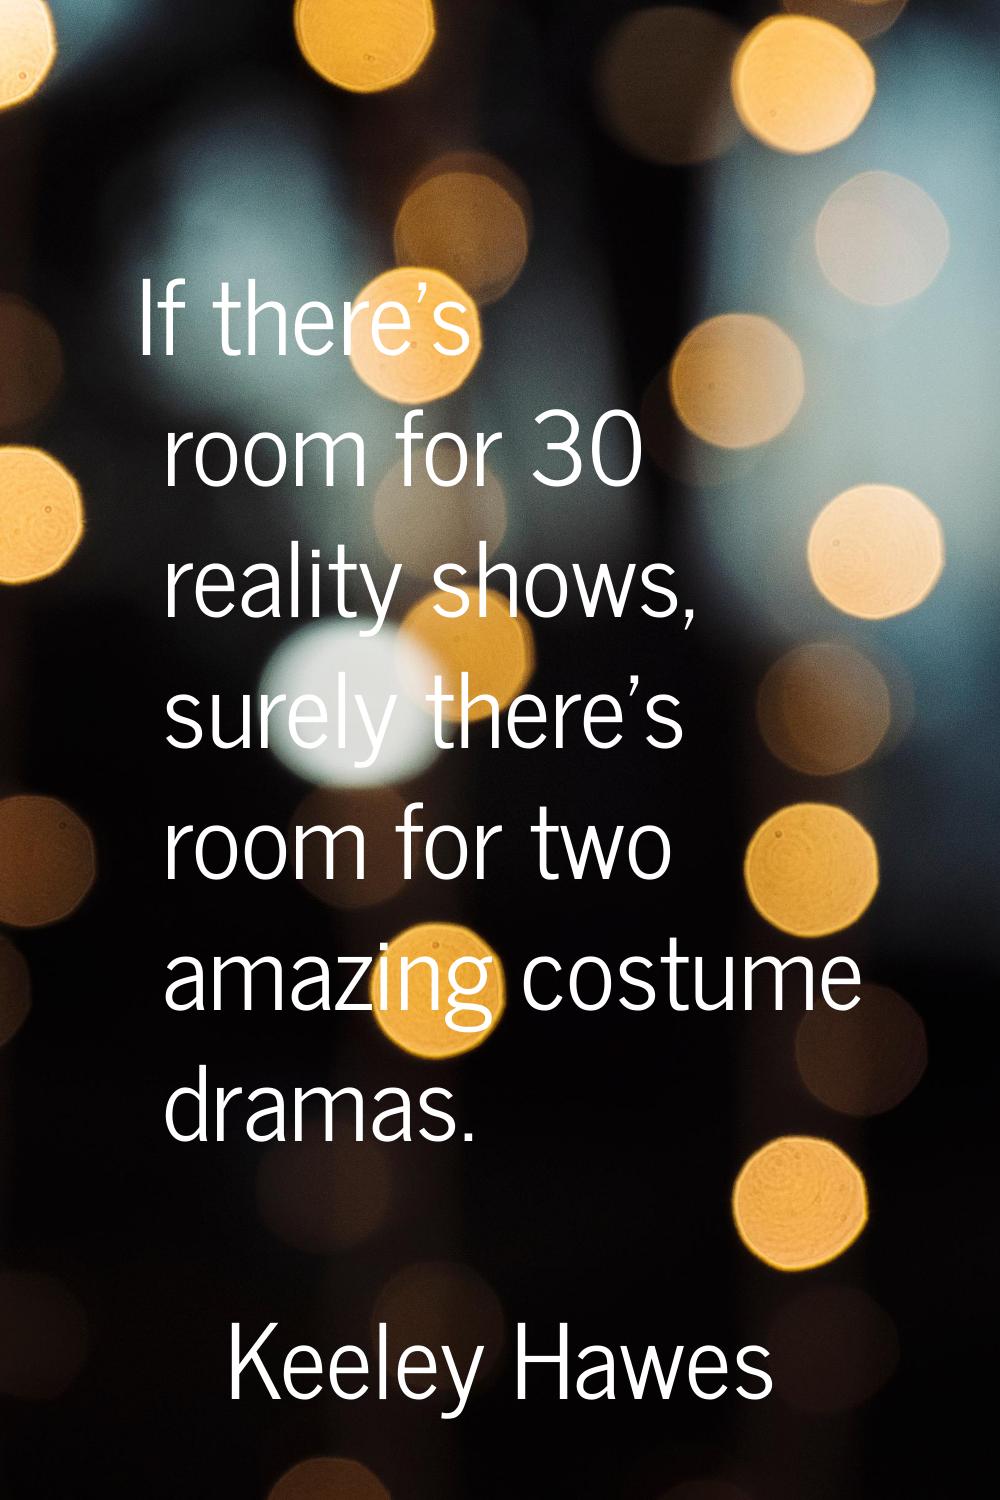 If there's room for 30 reality shows, surely there's room for two amazing costume dramas.